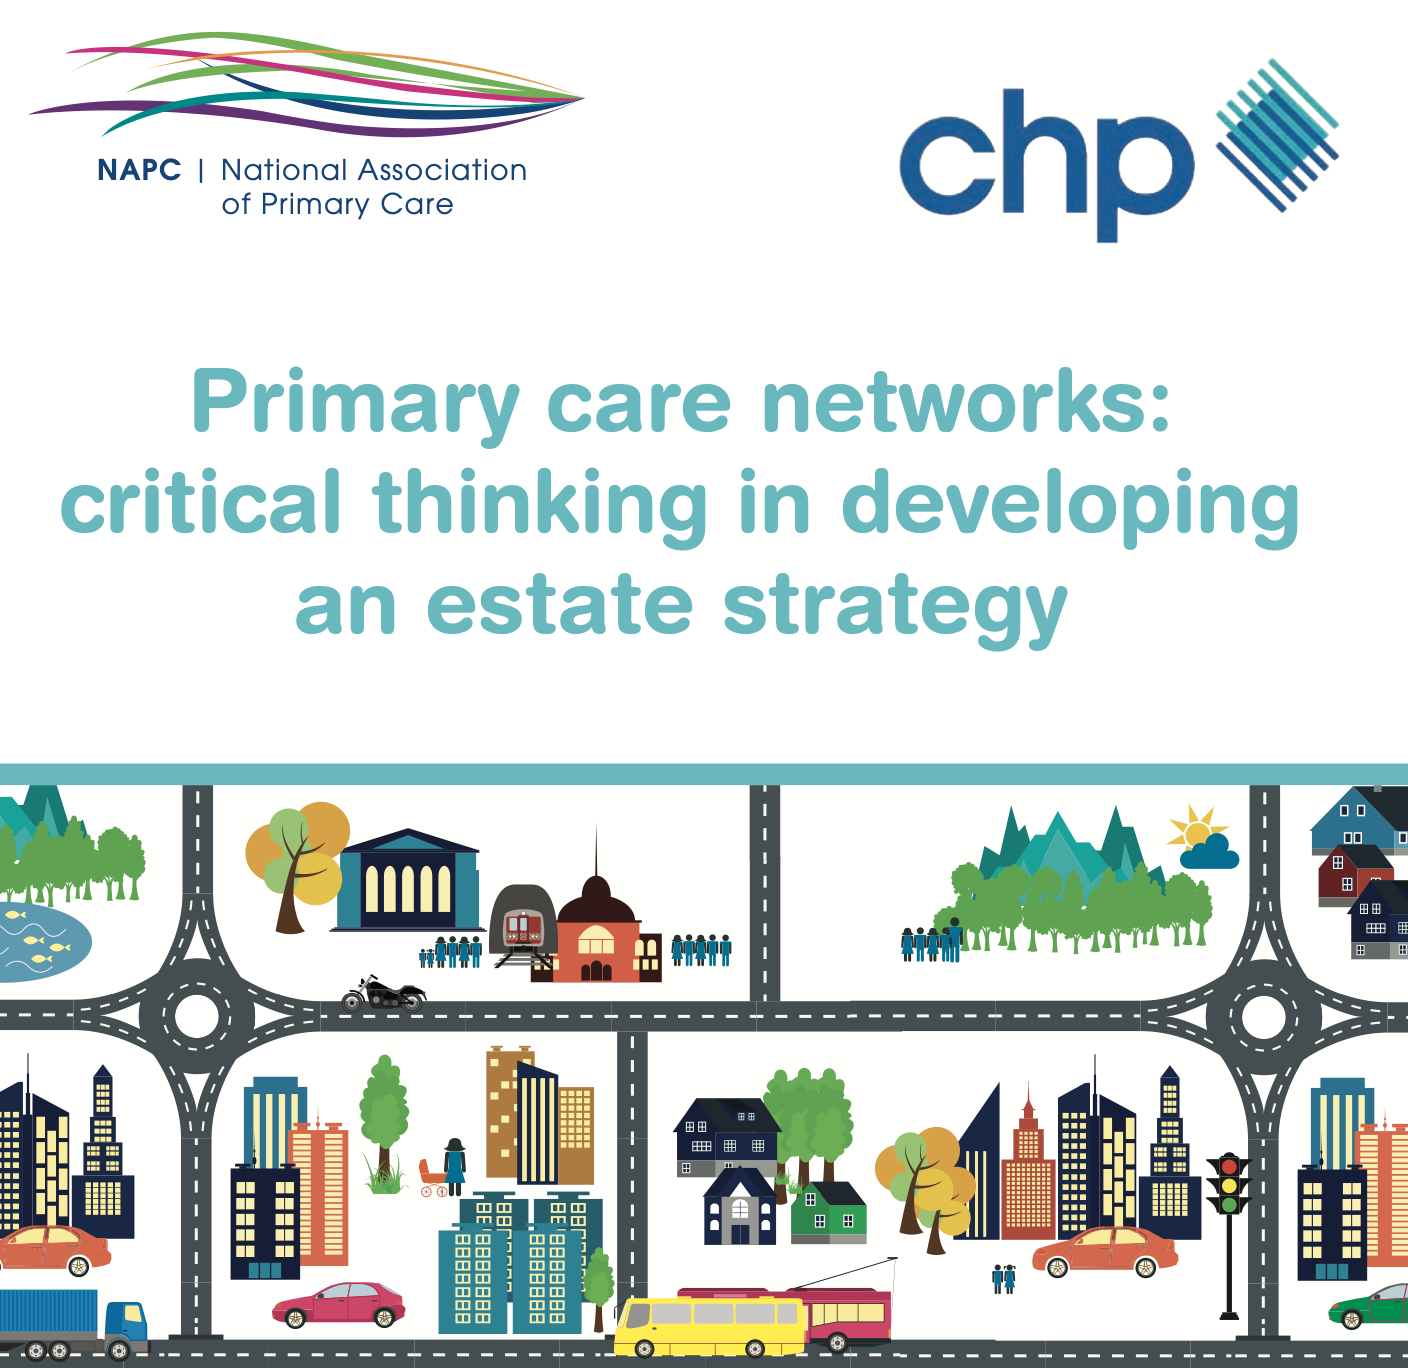 New practical estate guide for primary care networks to meet the challenges of integrated care from NAPC and CHP featured image